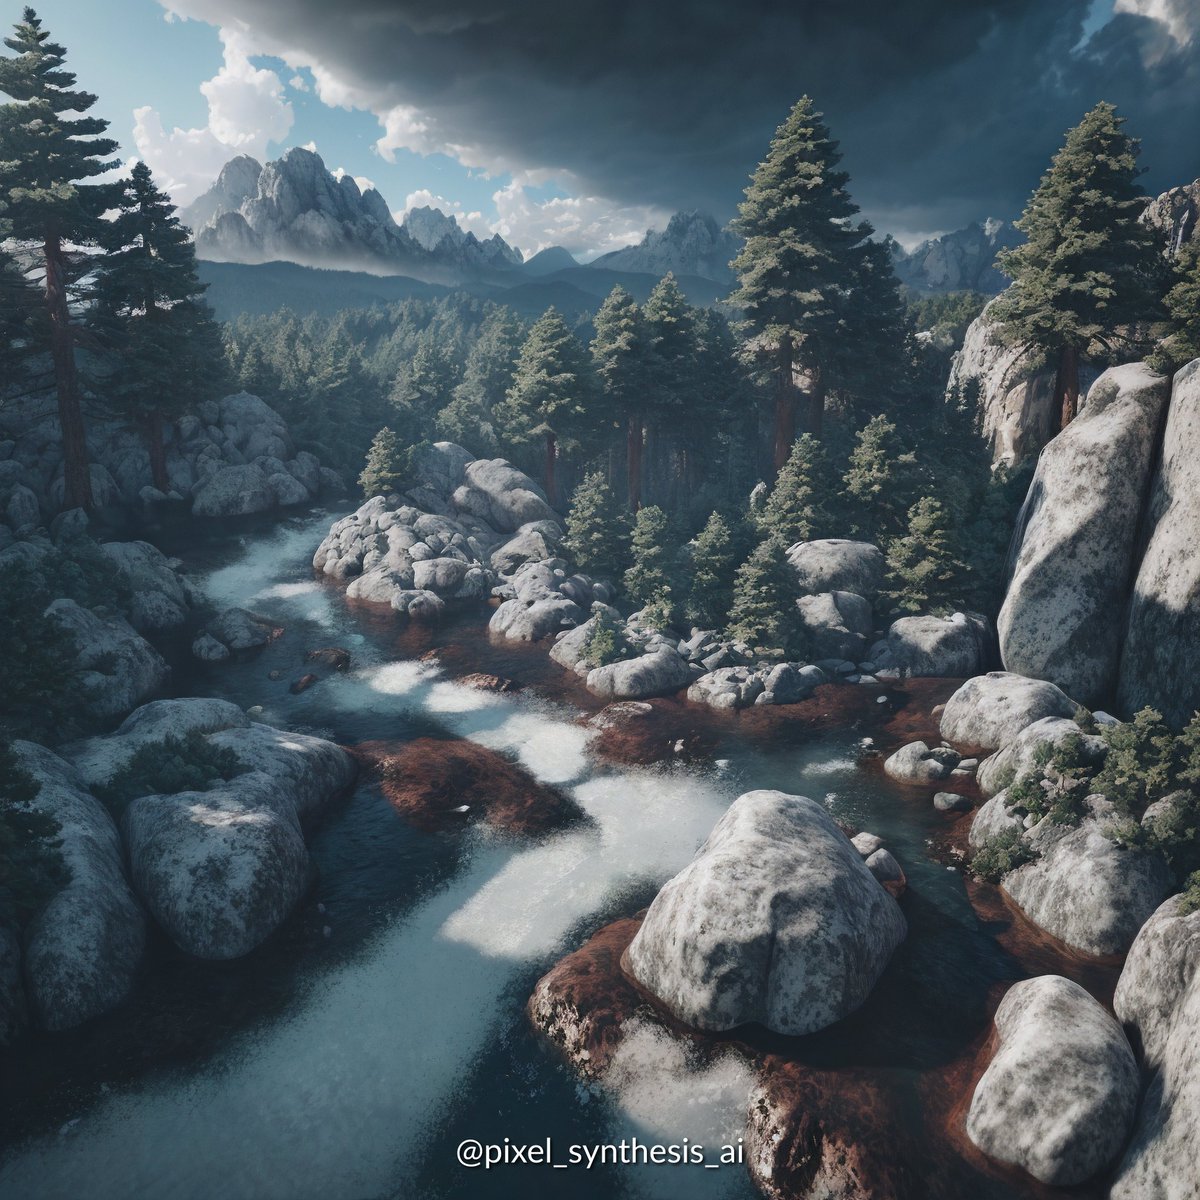 Behold the captivating beauty of the overcast day, imagined by AI 🌲🏞️☁️.
#aiart #aigenerated #aigeneratedart #stablediffusionart #sdxl #huggingface #openai #chatgpt #civitai #airender #digitalart #masterpiece #aiimage #aiimagery #fountain #landscape #terrain #waterfall #nature